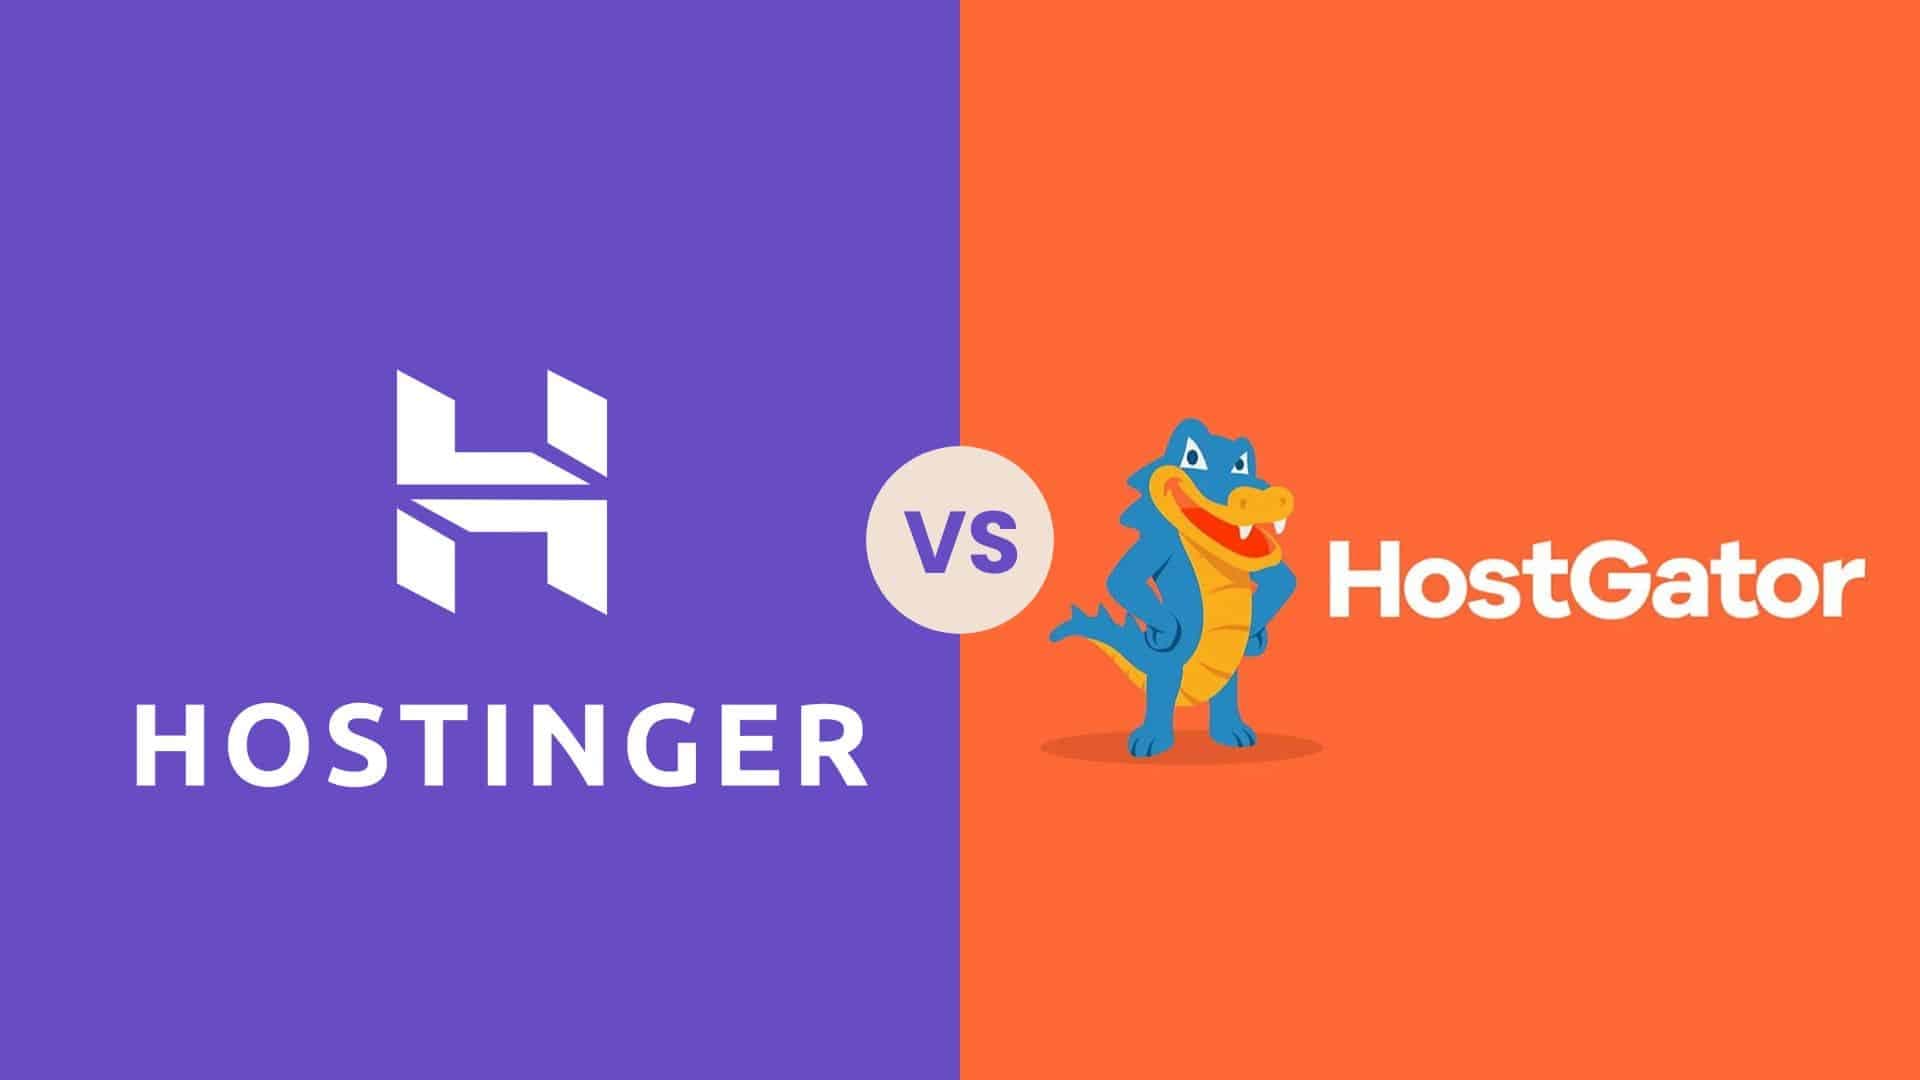 You are currently viewing Hostgator vs Hostinger: The Ultimate Showdown for Web Hosting in 2023